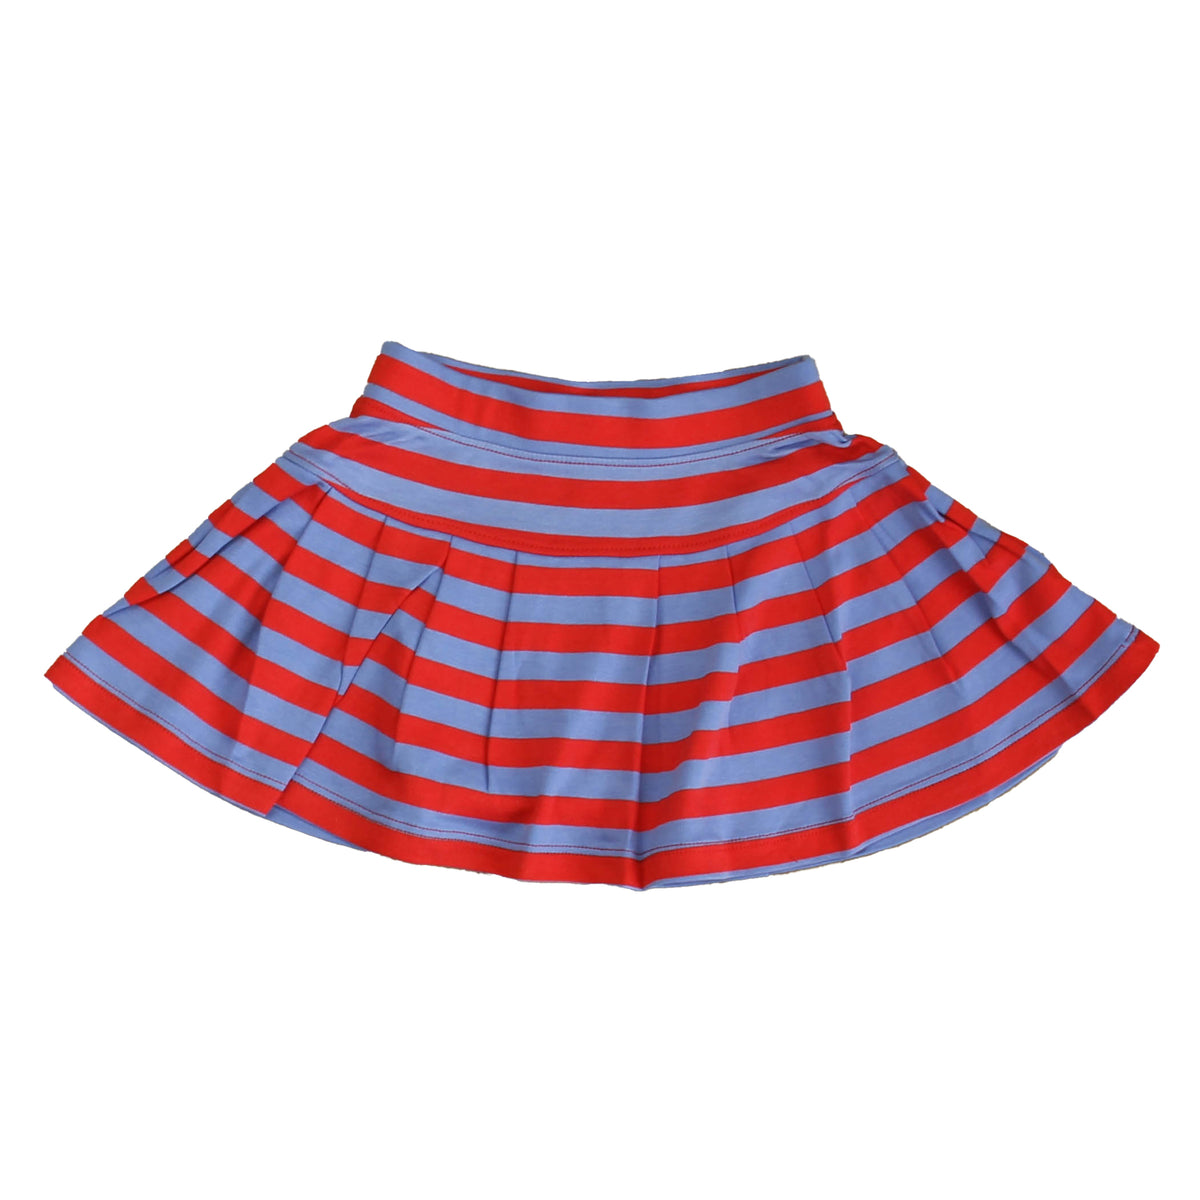 New with Tags: High Risk Red | Wedgewood Skirt size: 2-5T -- FINAL SALE